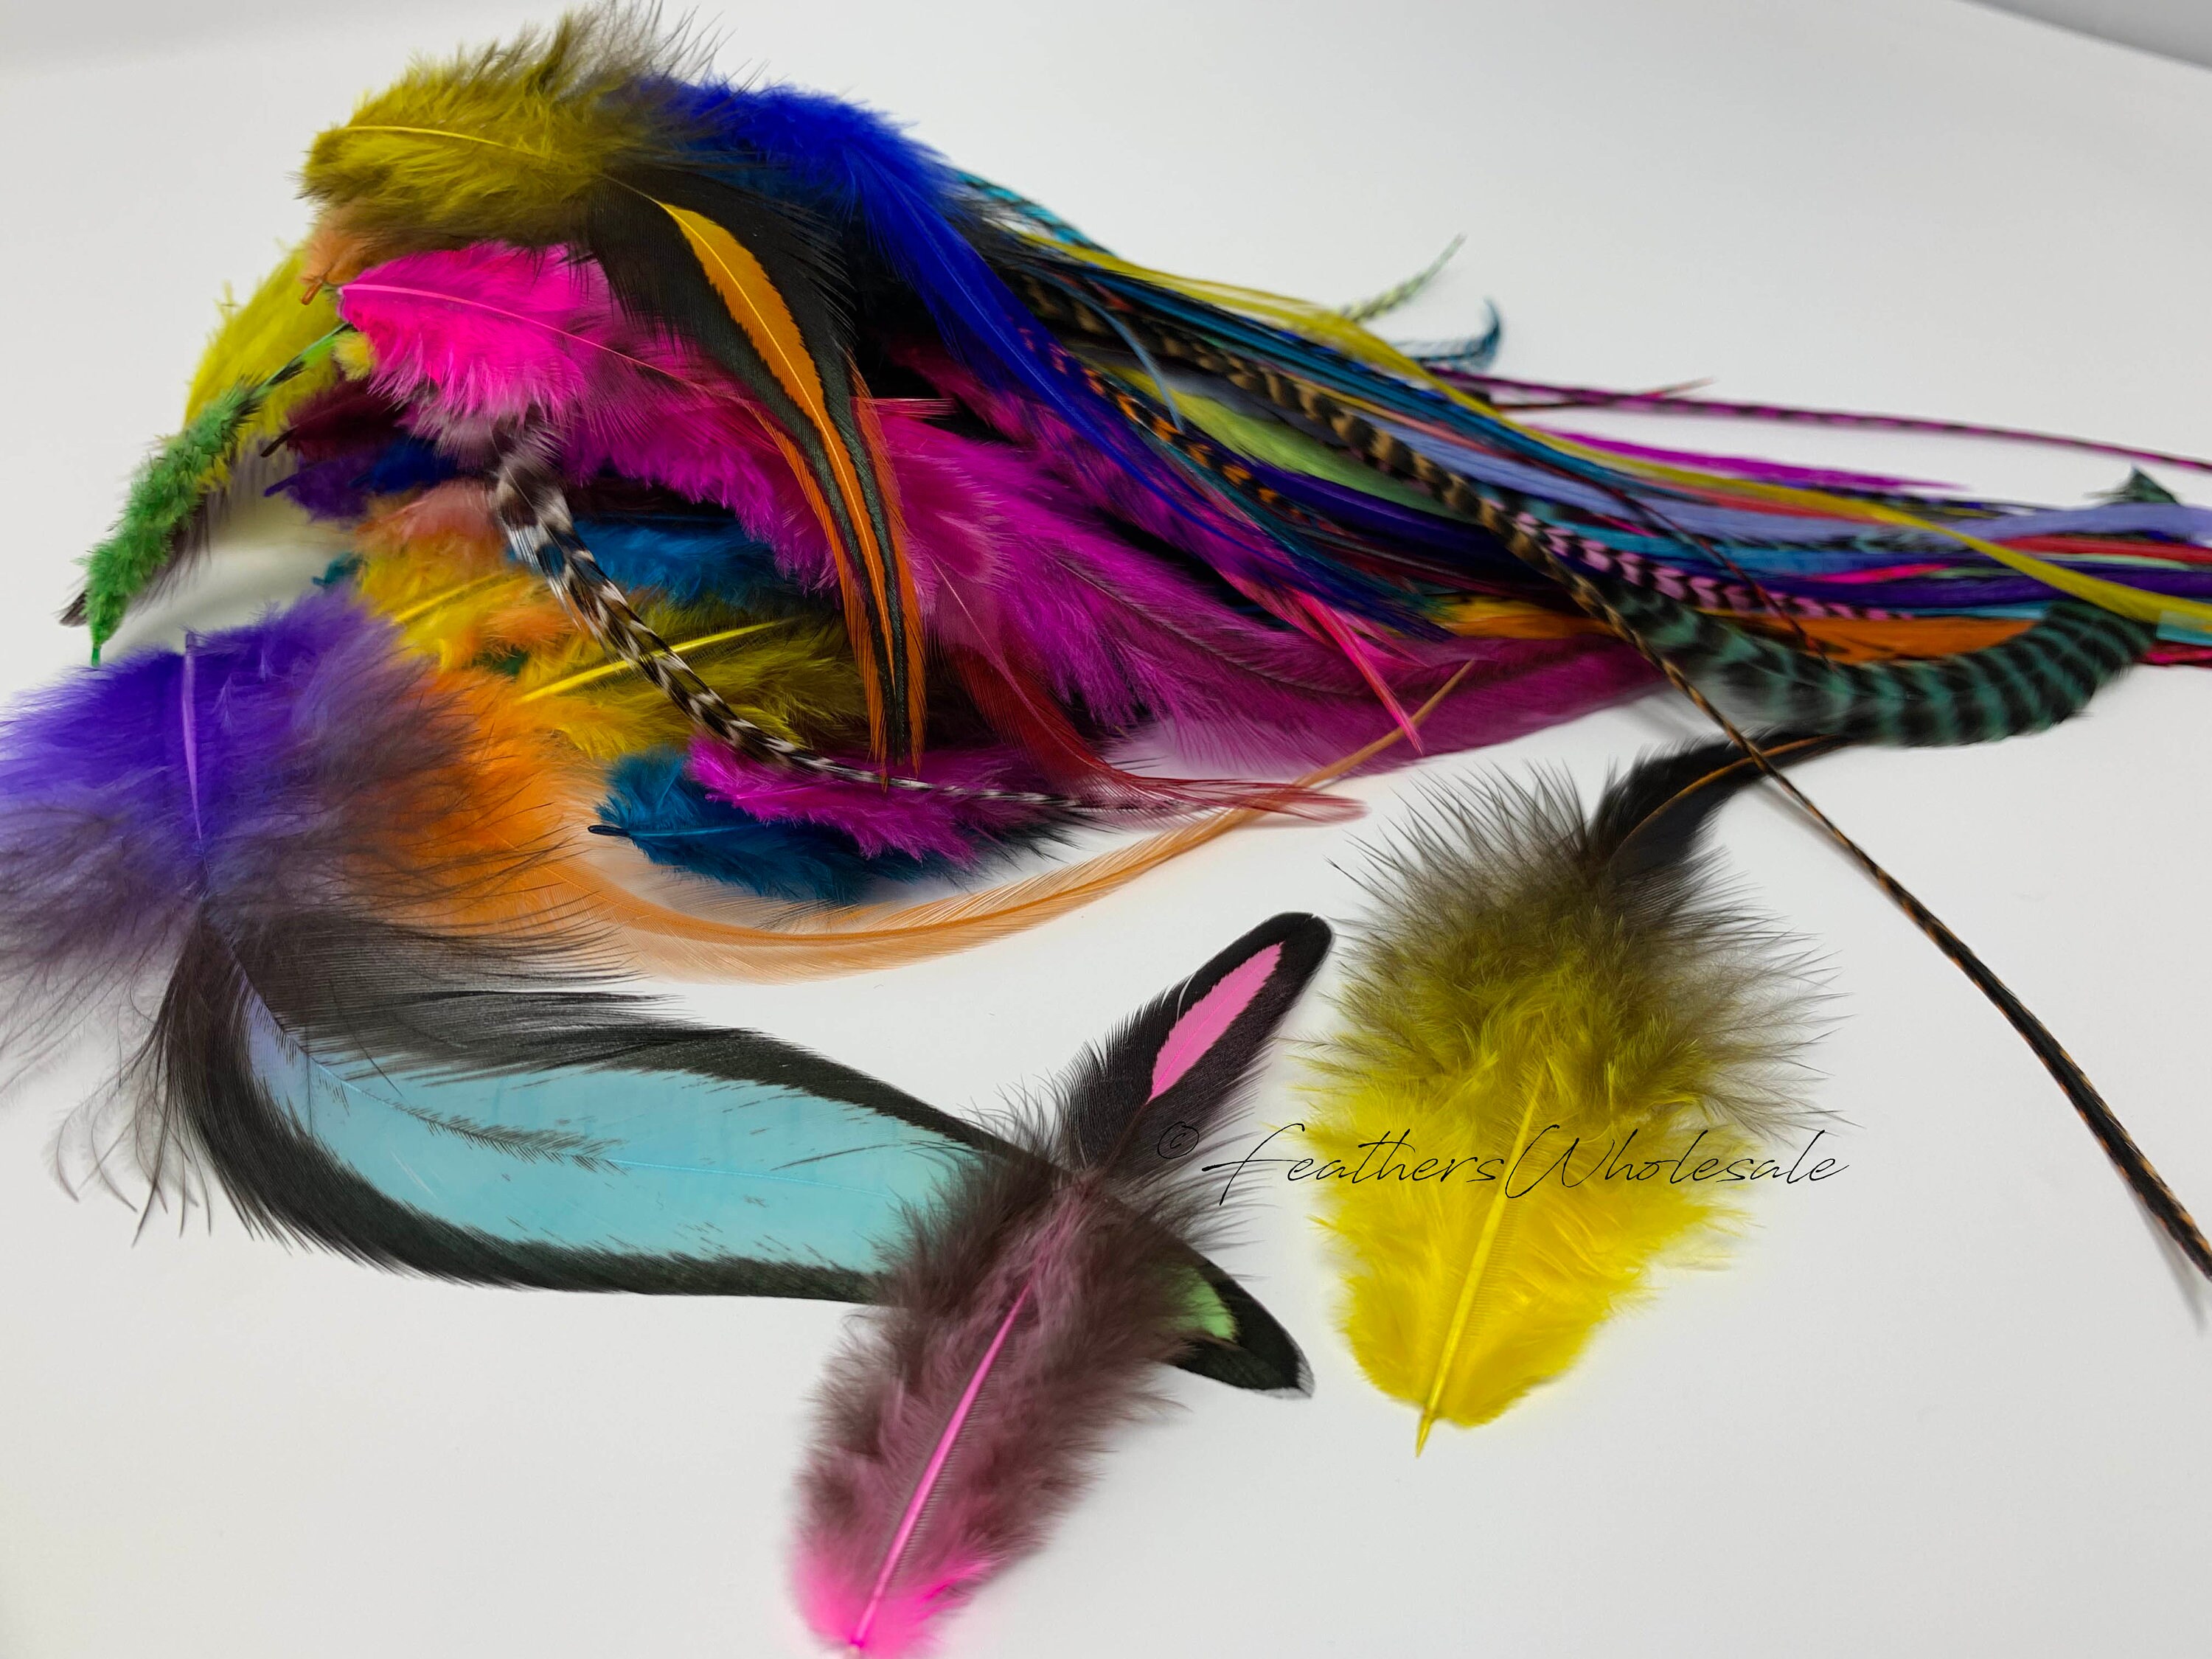 Bulk Feathers for Earrings Natural Medium Length Feather Extensions for  Bangs Beards Earring Feathers Rooster Feathers Extensions 100 